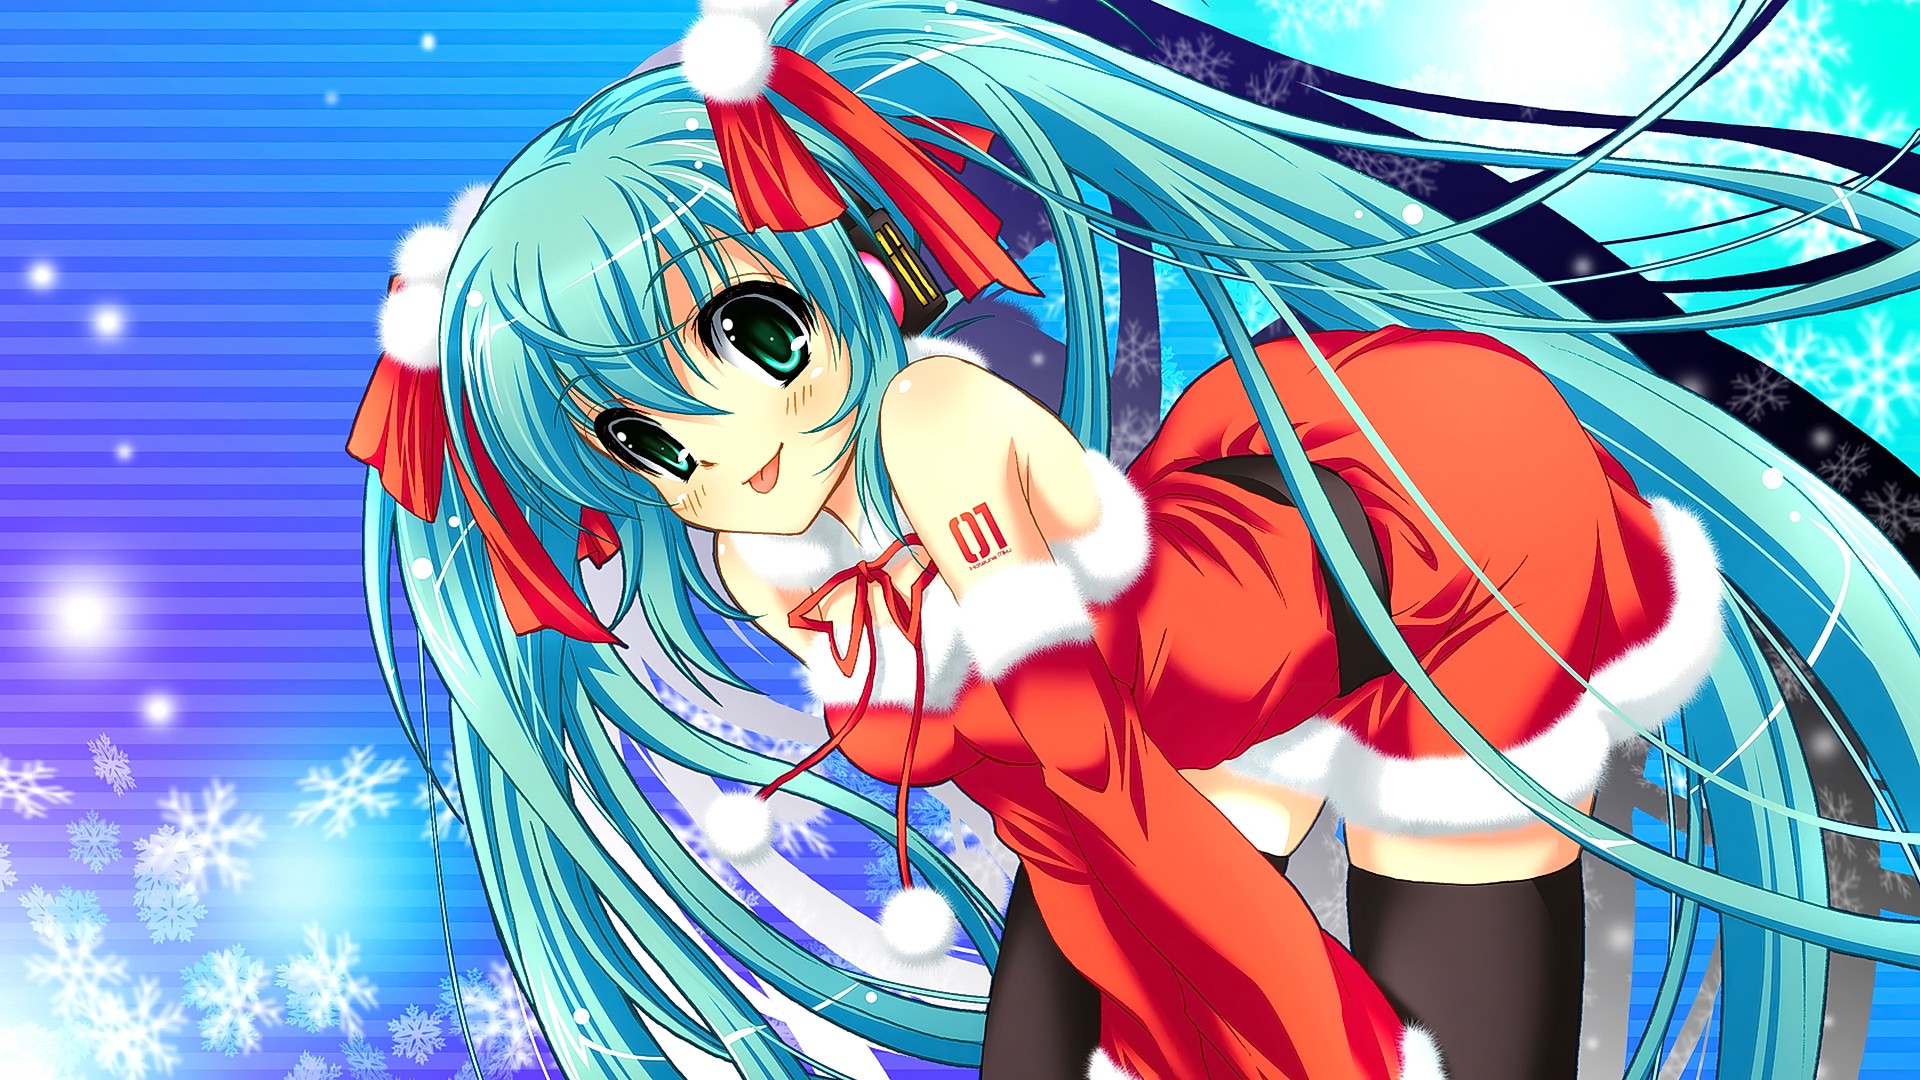 Anime 1920x1080 anime anime girls Vocaloid Hatsune Miku thigh-highs bent over cyan hair tongues tongue out long hair Santa costume Christmas green eyes stockings